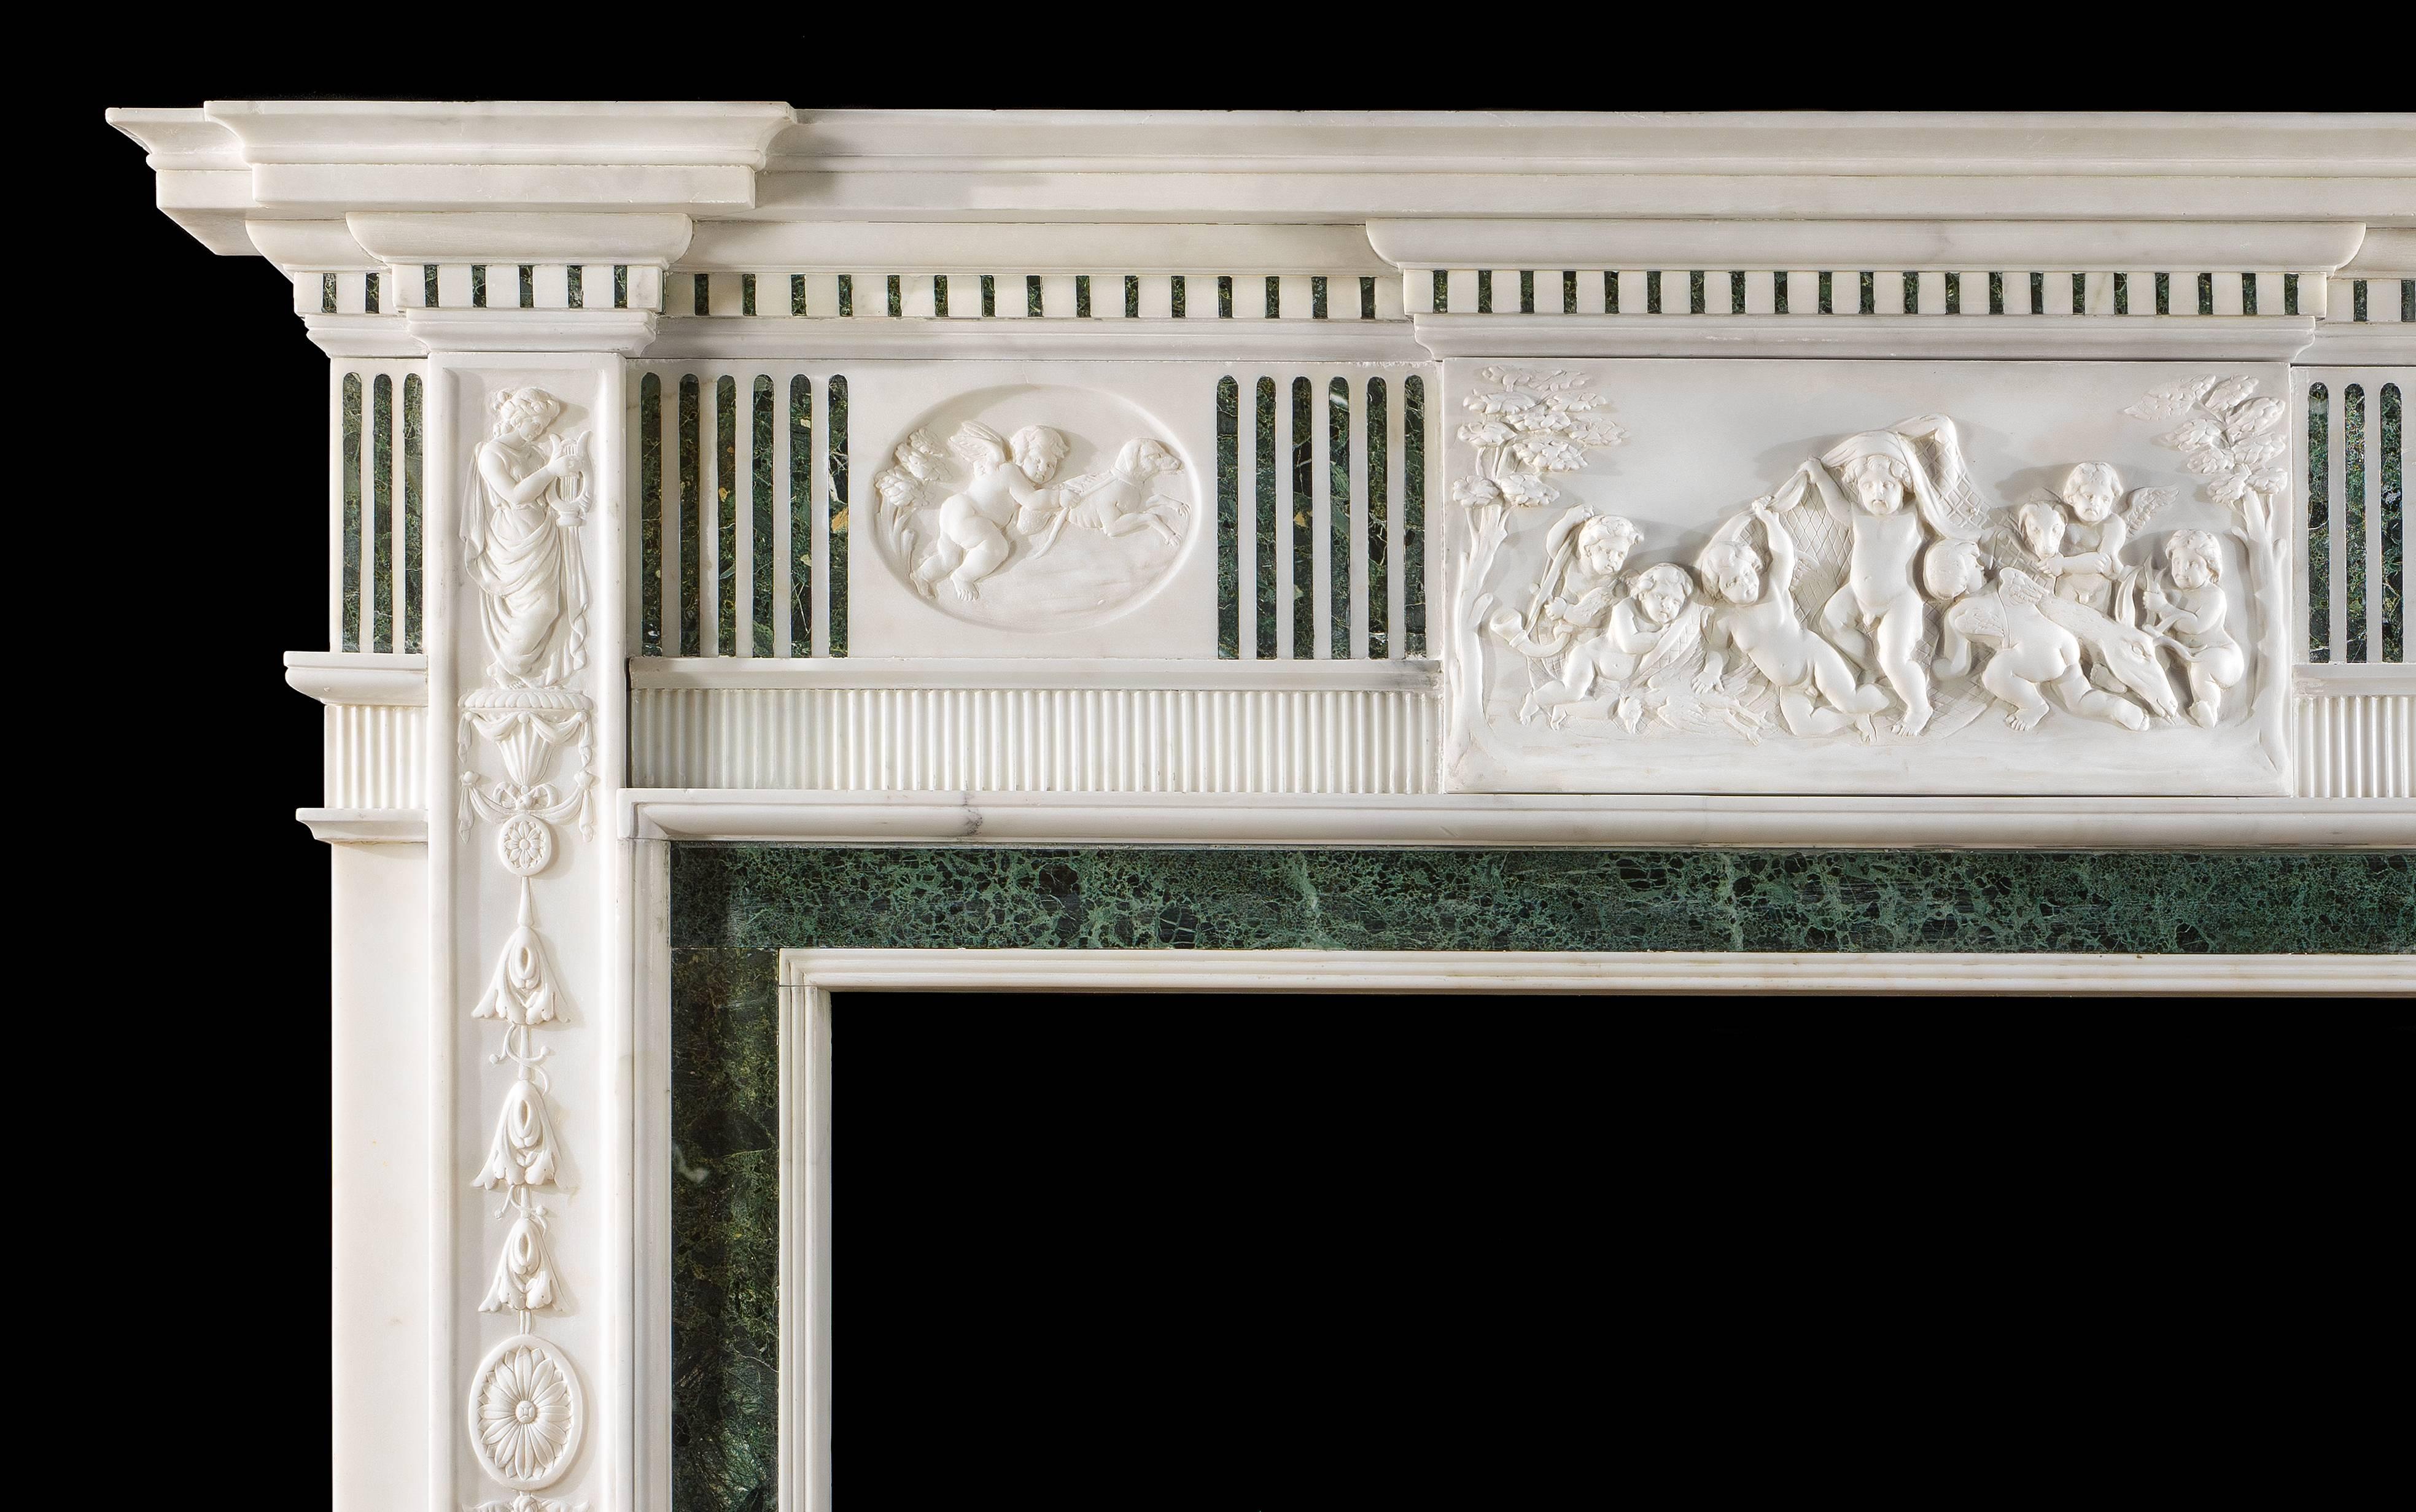 A fine early 20th century Georgian style statuary marble chimneypiece with Verde Antico inlay. The moulded dentil cornice shelf is set above an inlaid fluted frieze with a central tablet of cavorting cherubs flanked by oval panels of hunting cherubs